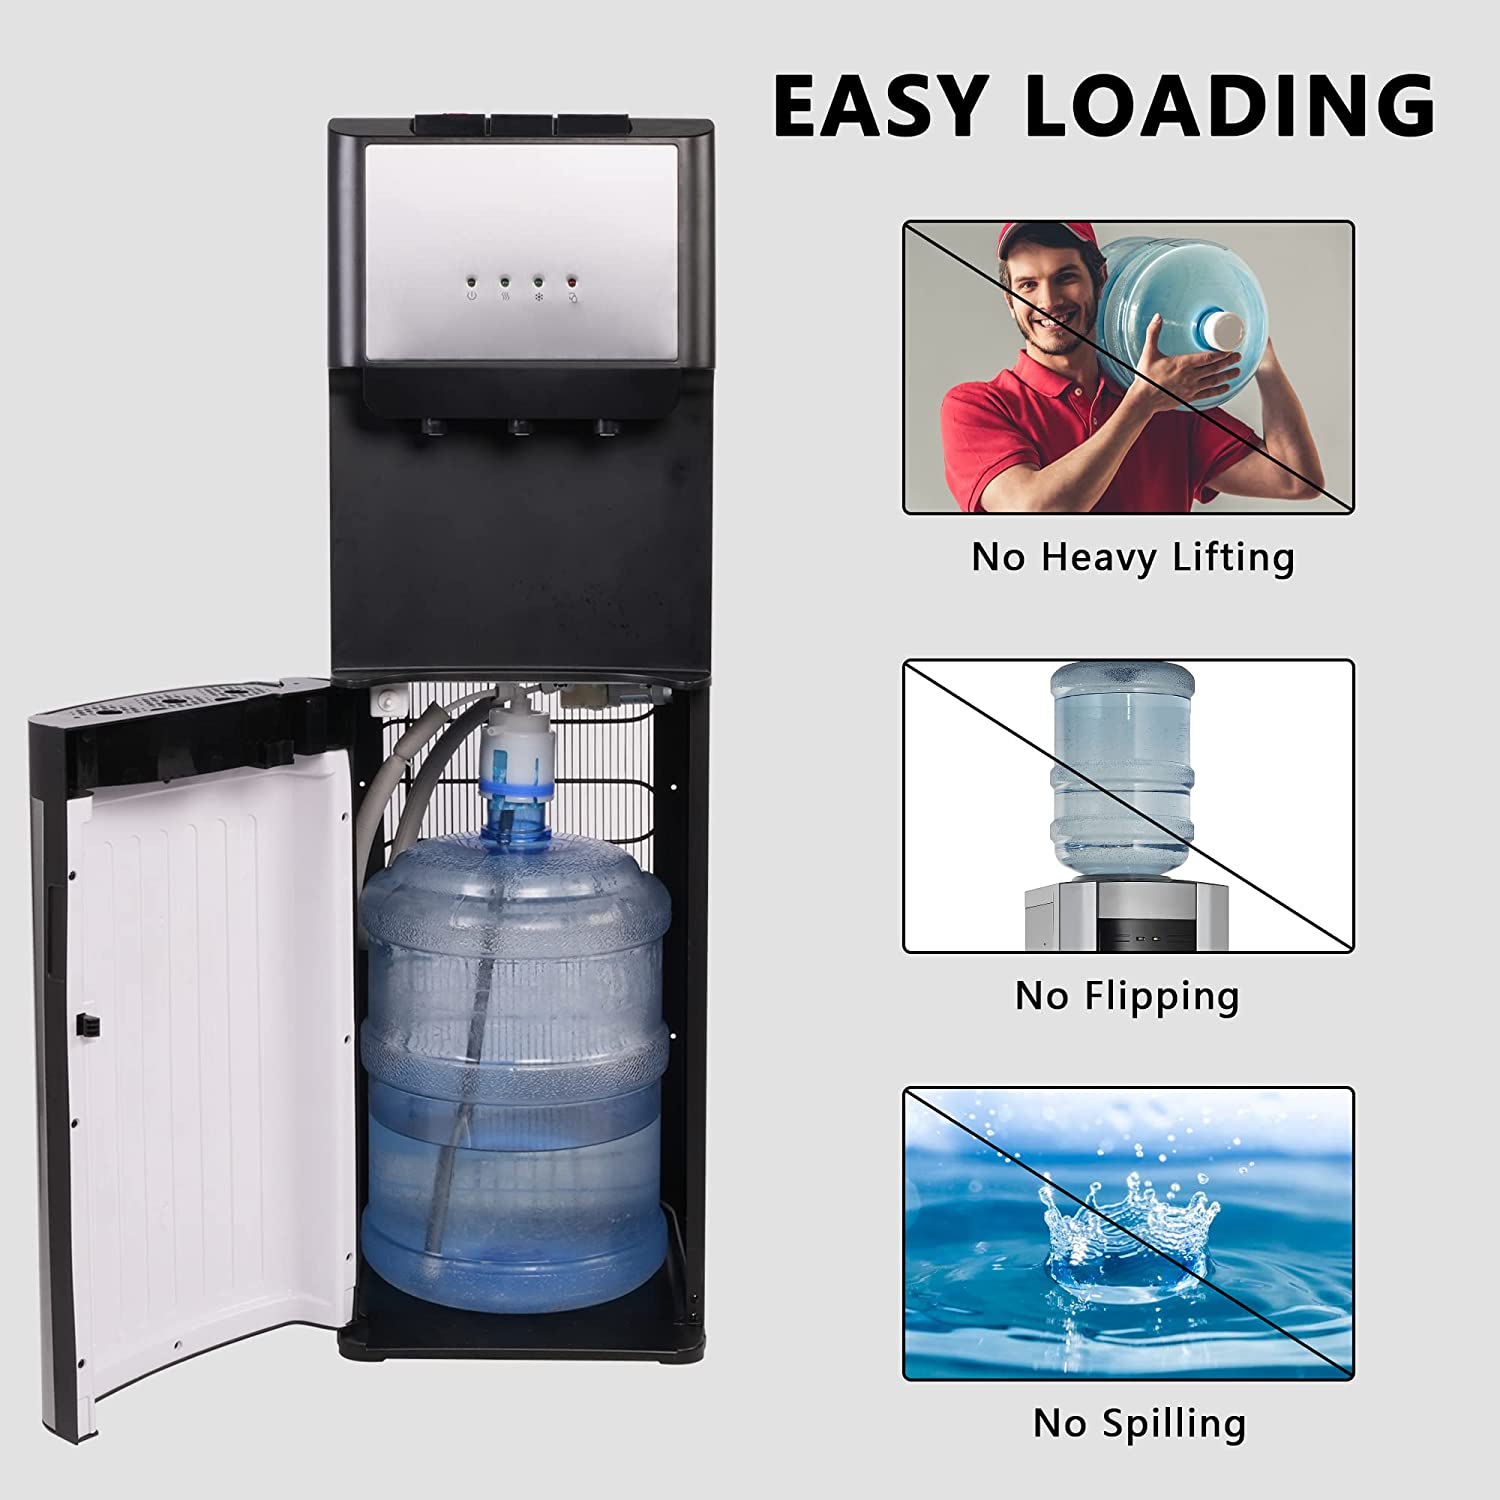 3-5 Gallon Bottom Loading Water Cooler Dispenser with 3-Temperature & Child Safety Lock, Black